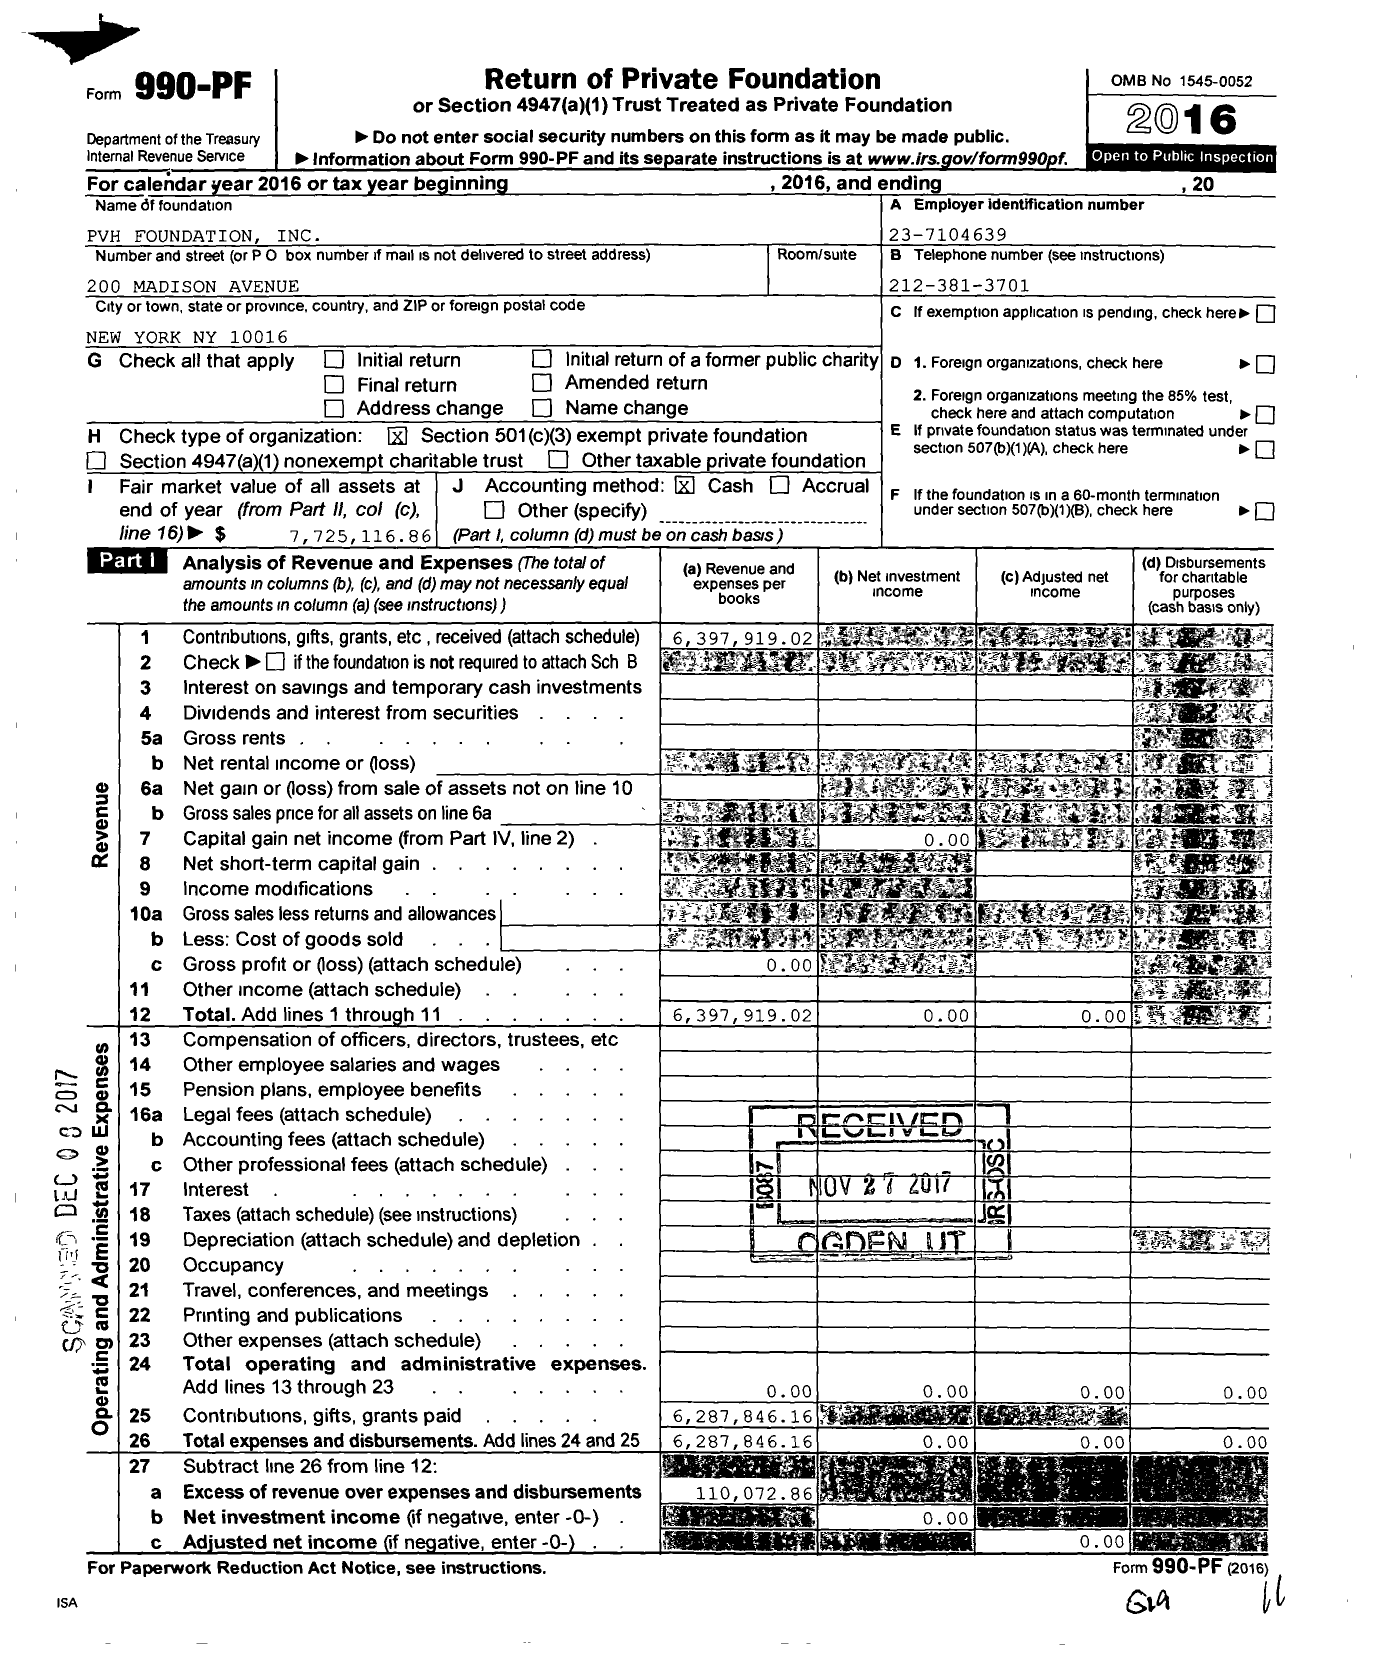 Image of first page of 2016 Form 990PF for PVH Foundation